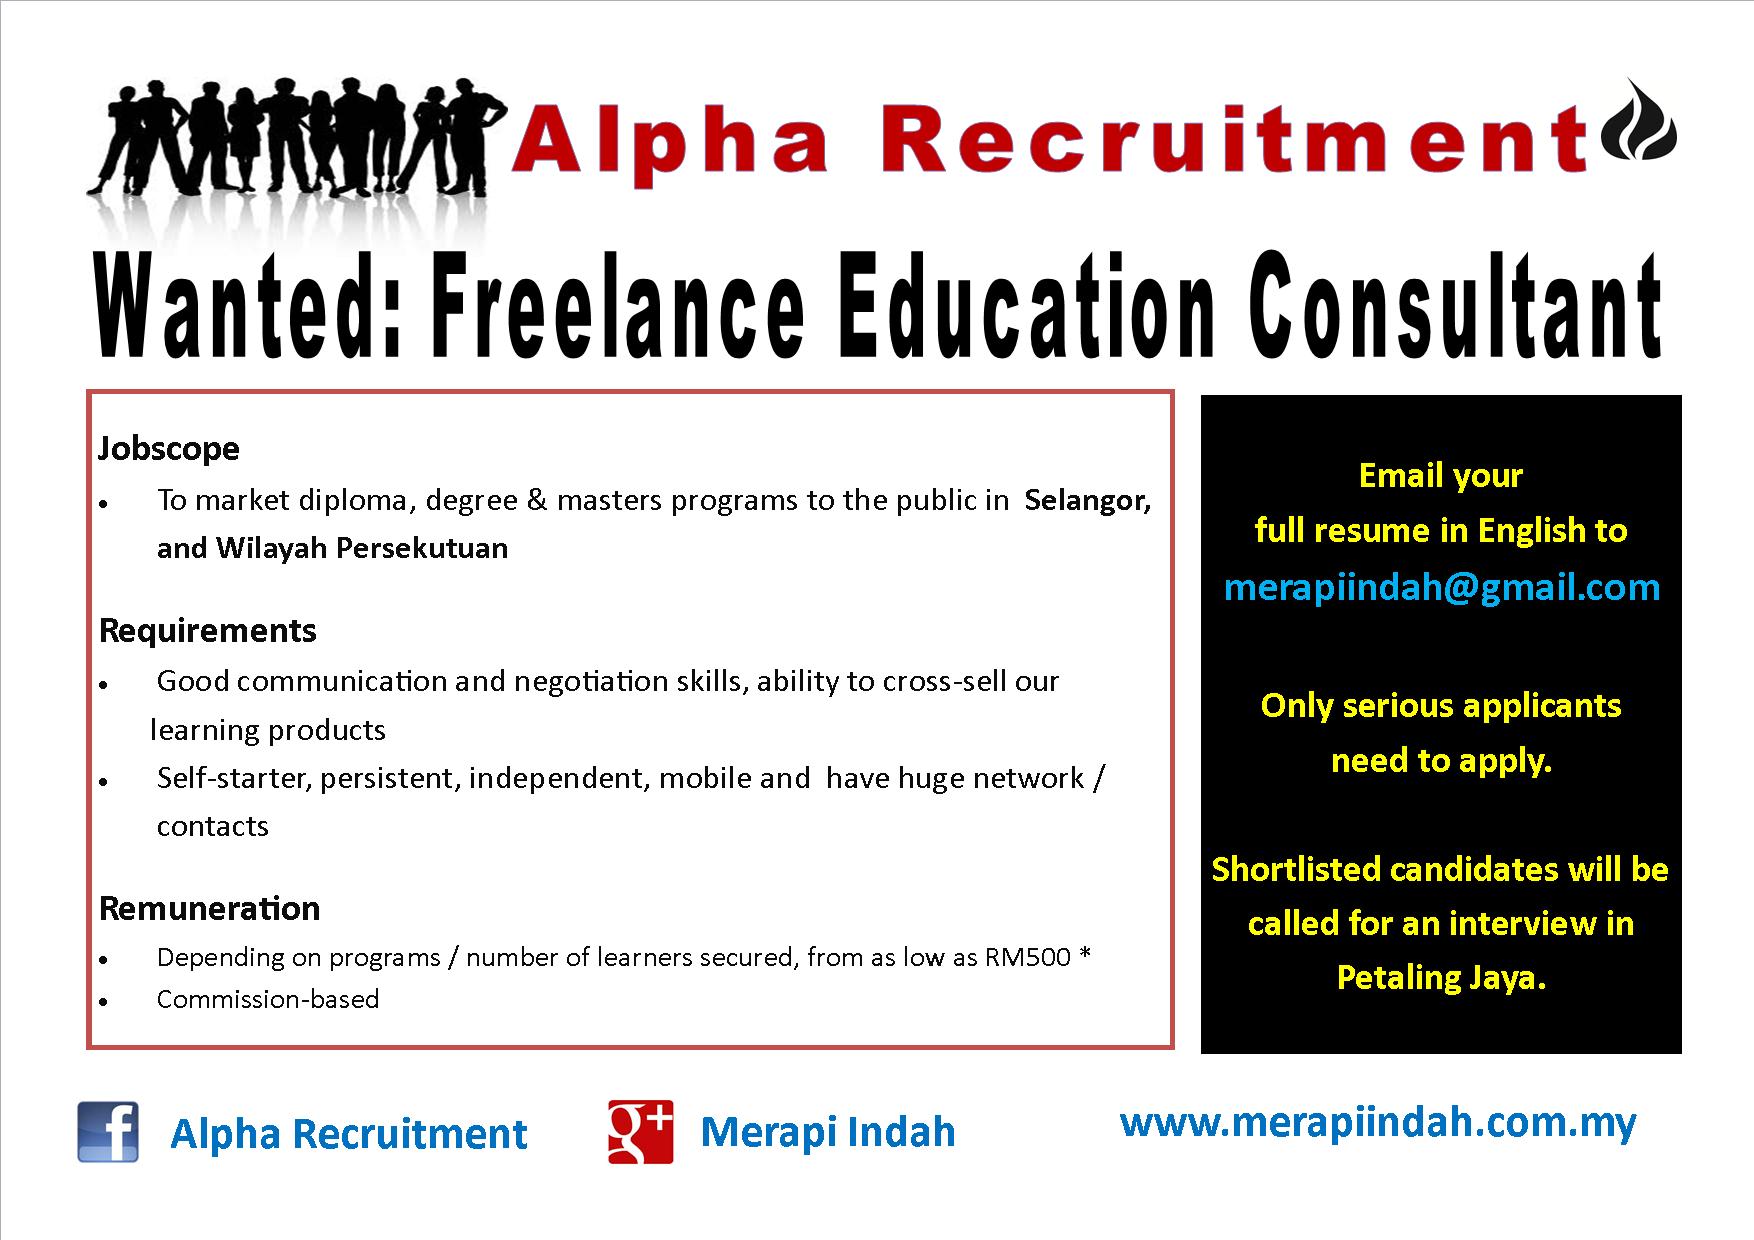 Wanted: Freelance Education Consultant in Klang Valley   Merapi Indah  freelance it consultant